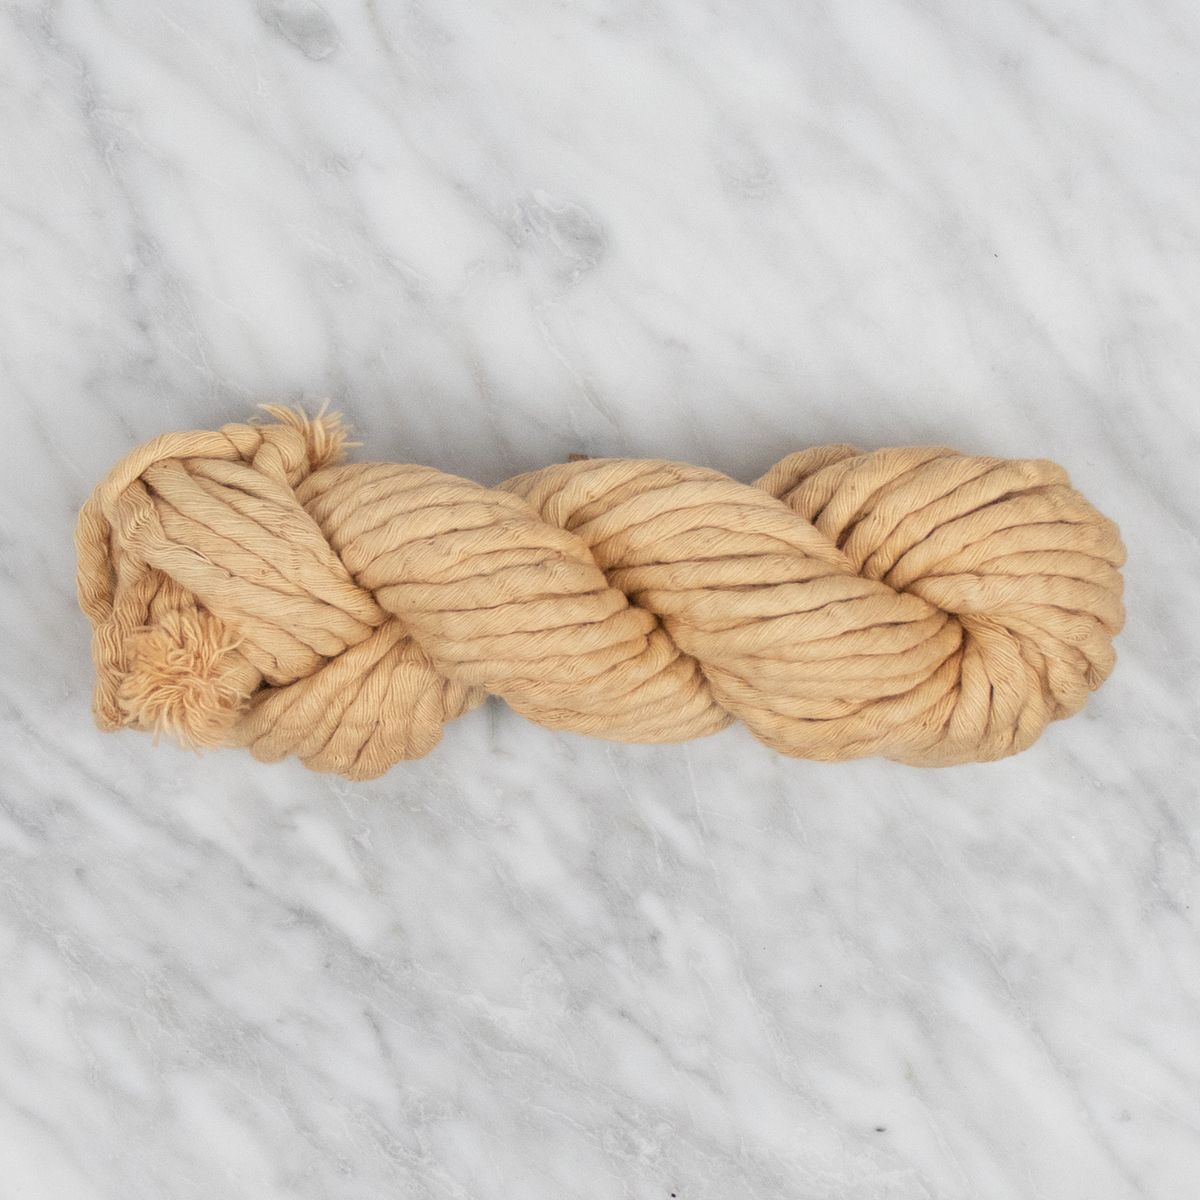 5mm Hand-Dyed Cotton String - Bright Peach - 100 grams